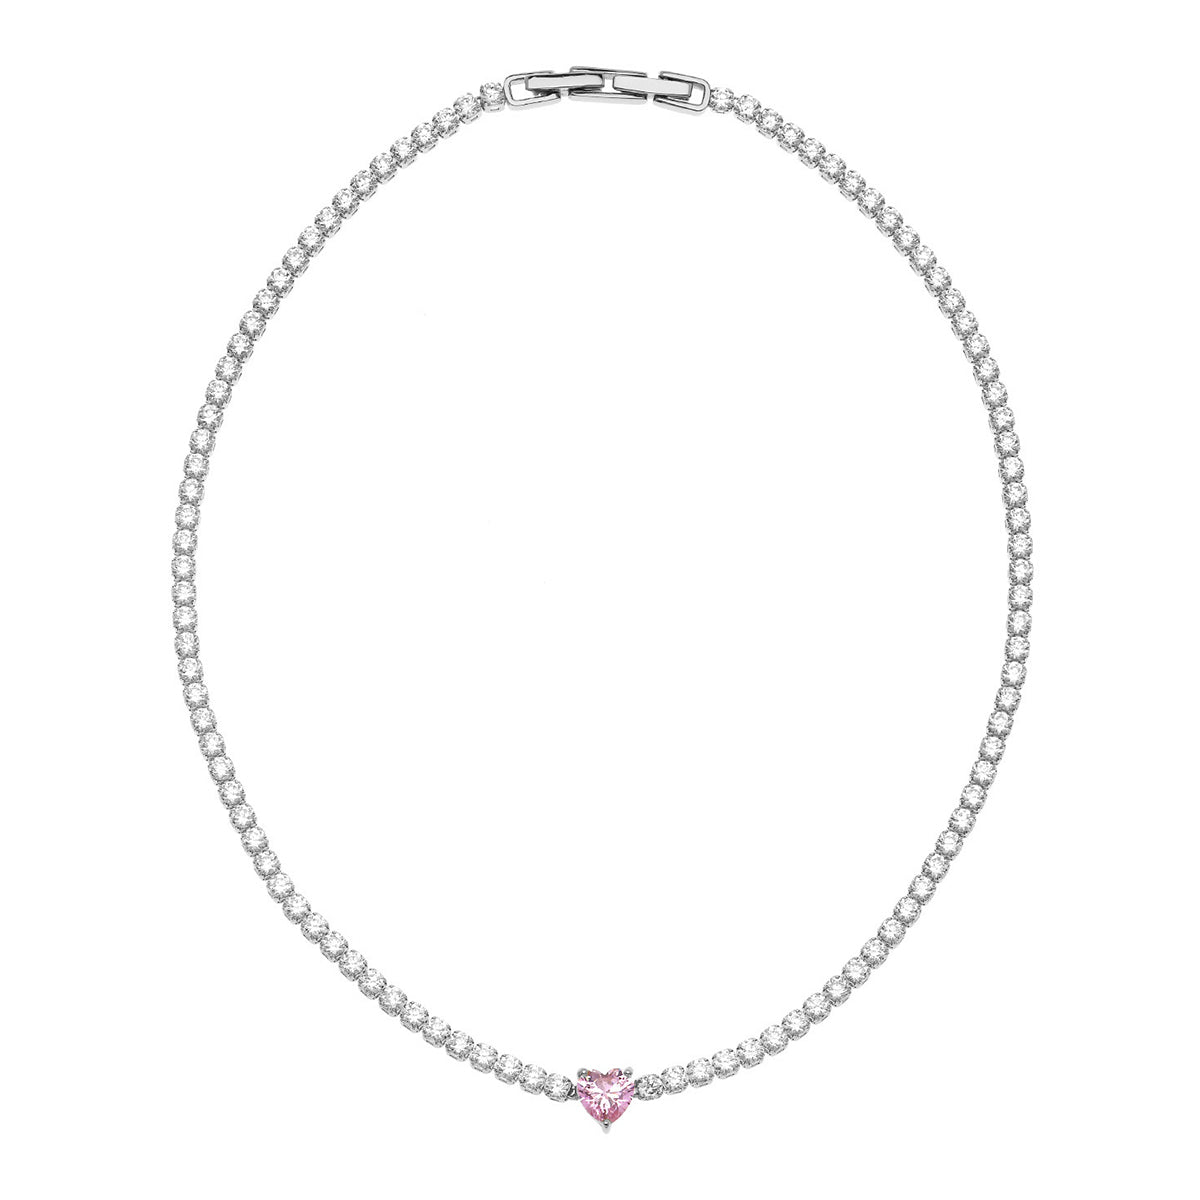 Sweetheart Tennis Necklace Silver Plated